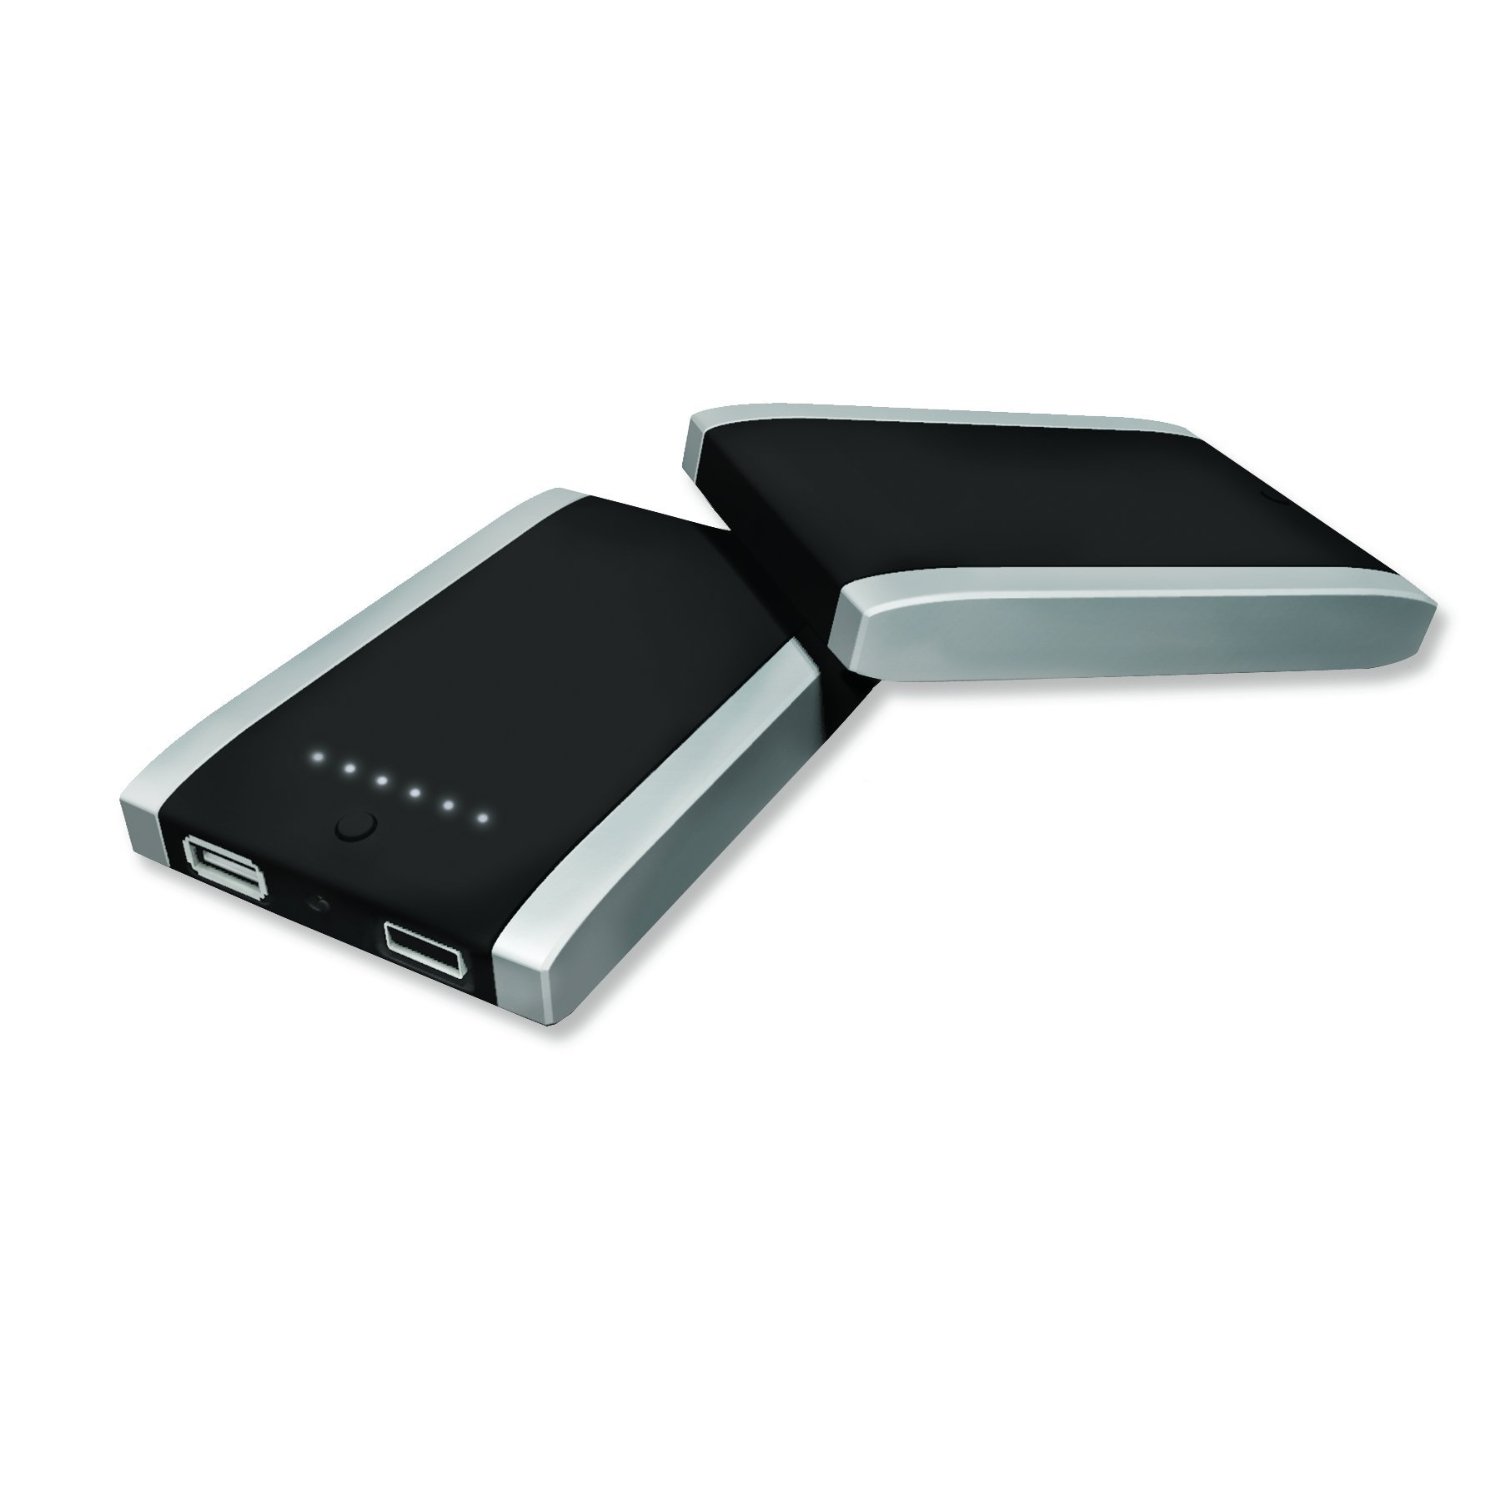 http://thetechjournal.com/wp-content/uploads/images/1109/1316594150-mophie-juice-pack-universal-powerstation-for-ios-devices-1.jpg